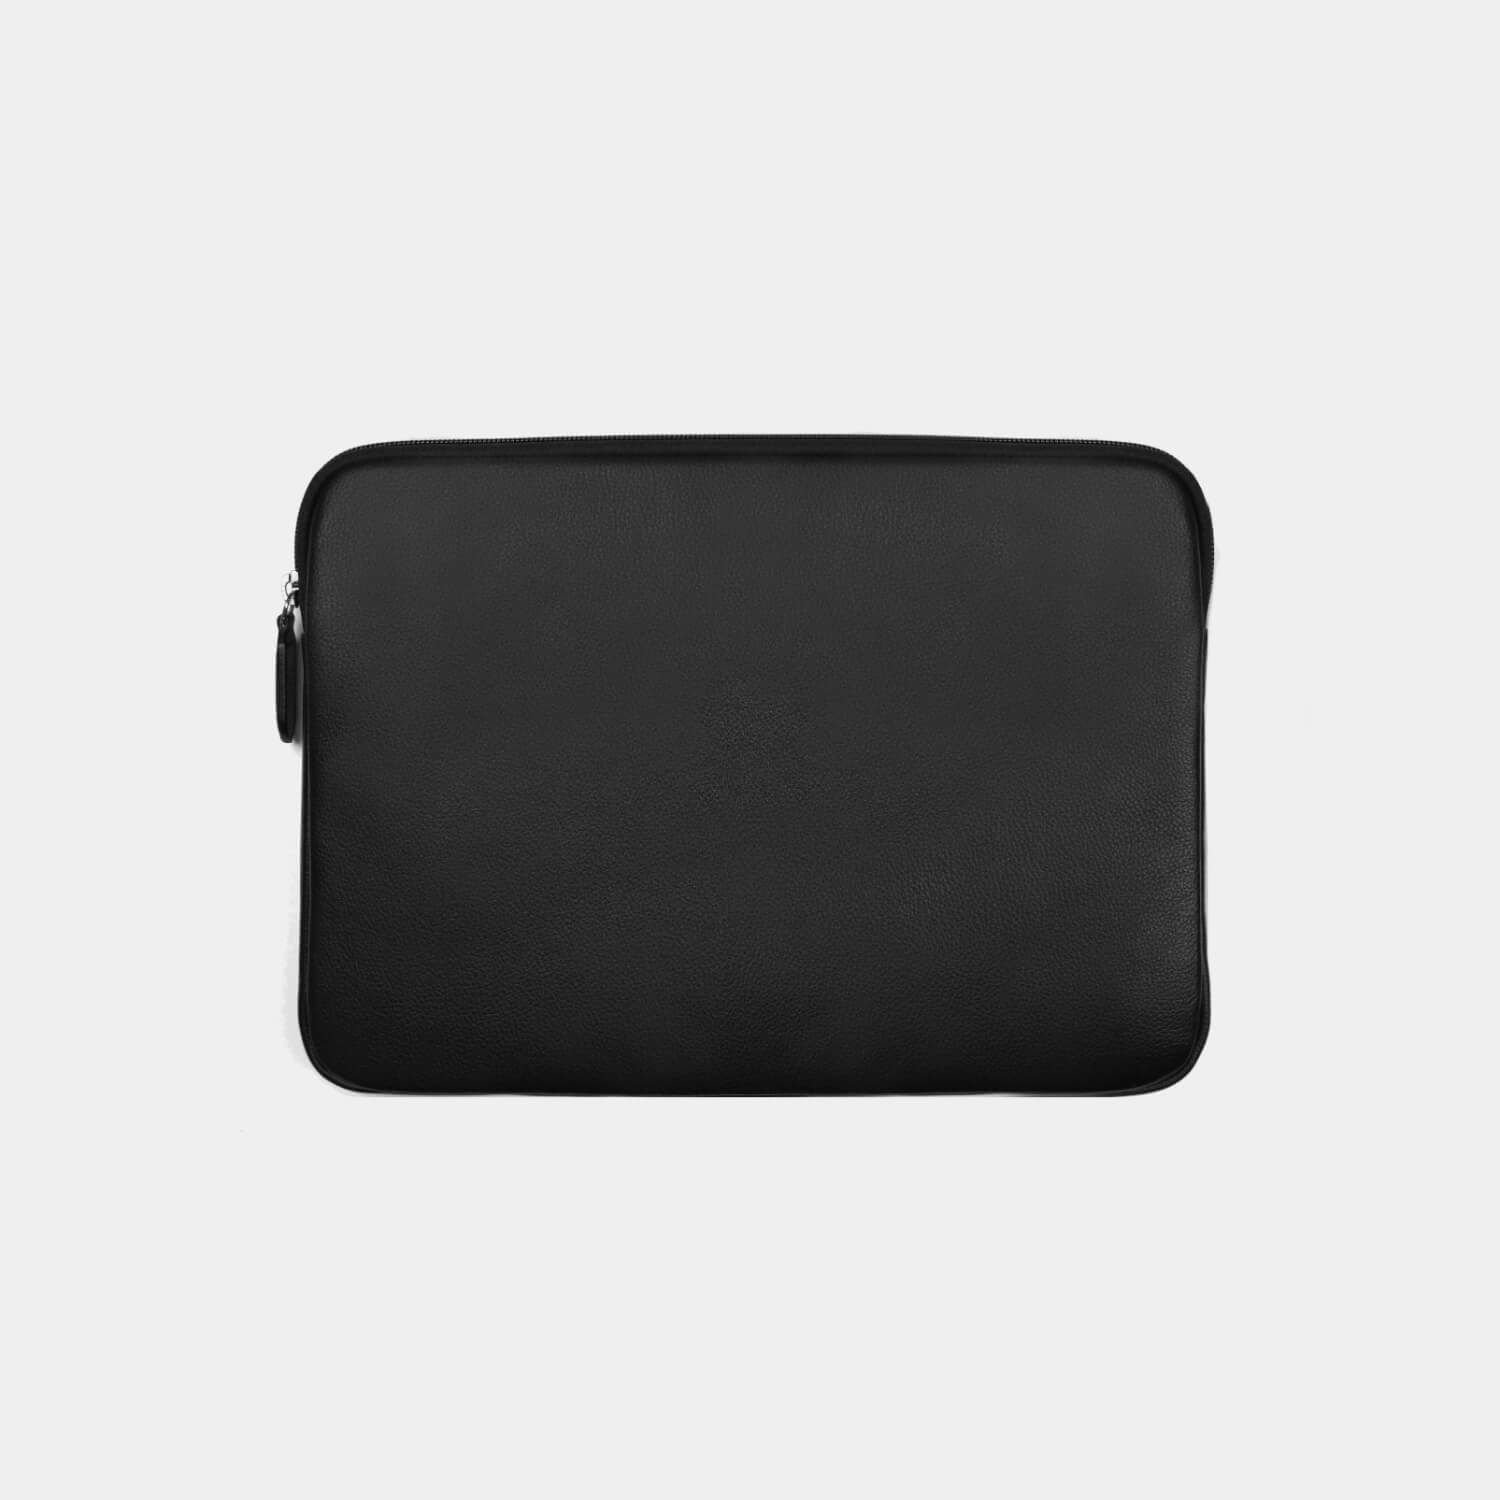 Fine grain leather laptop case with nylon zip and slip pocket on the inside